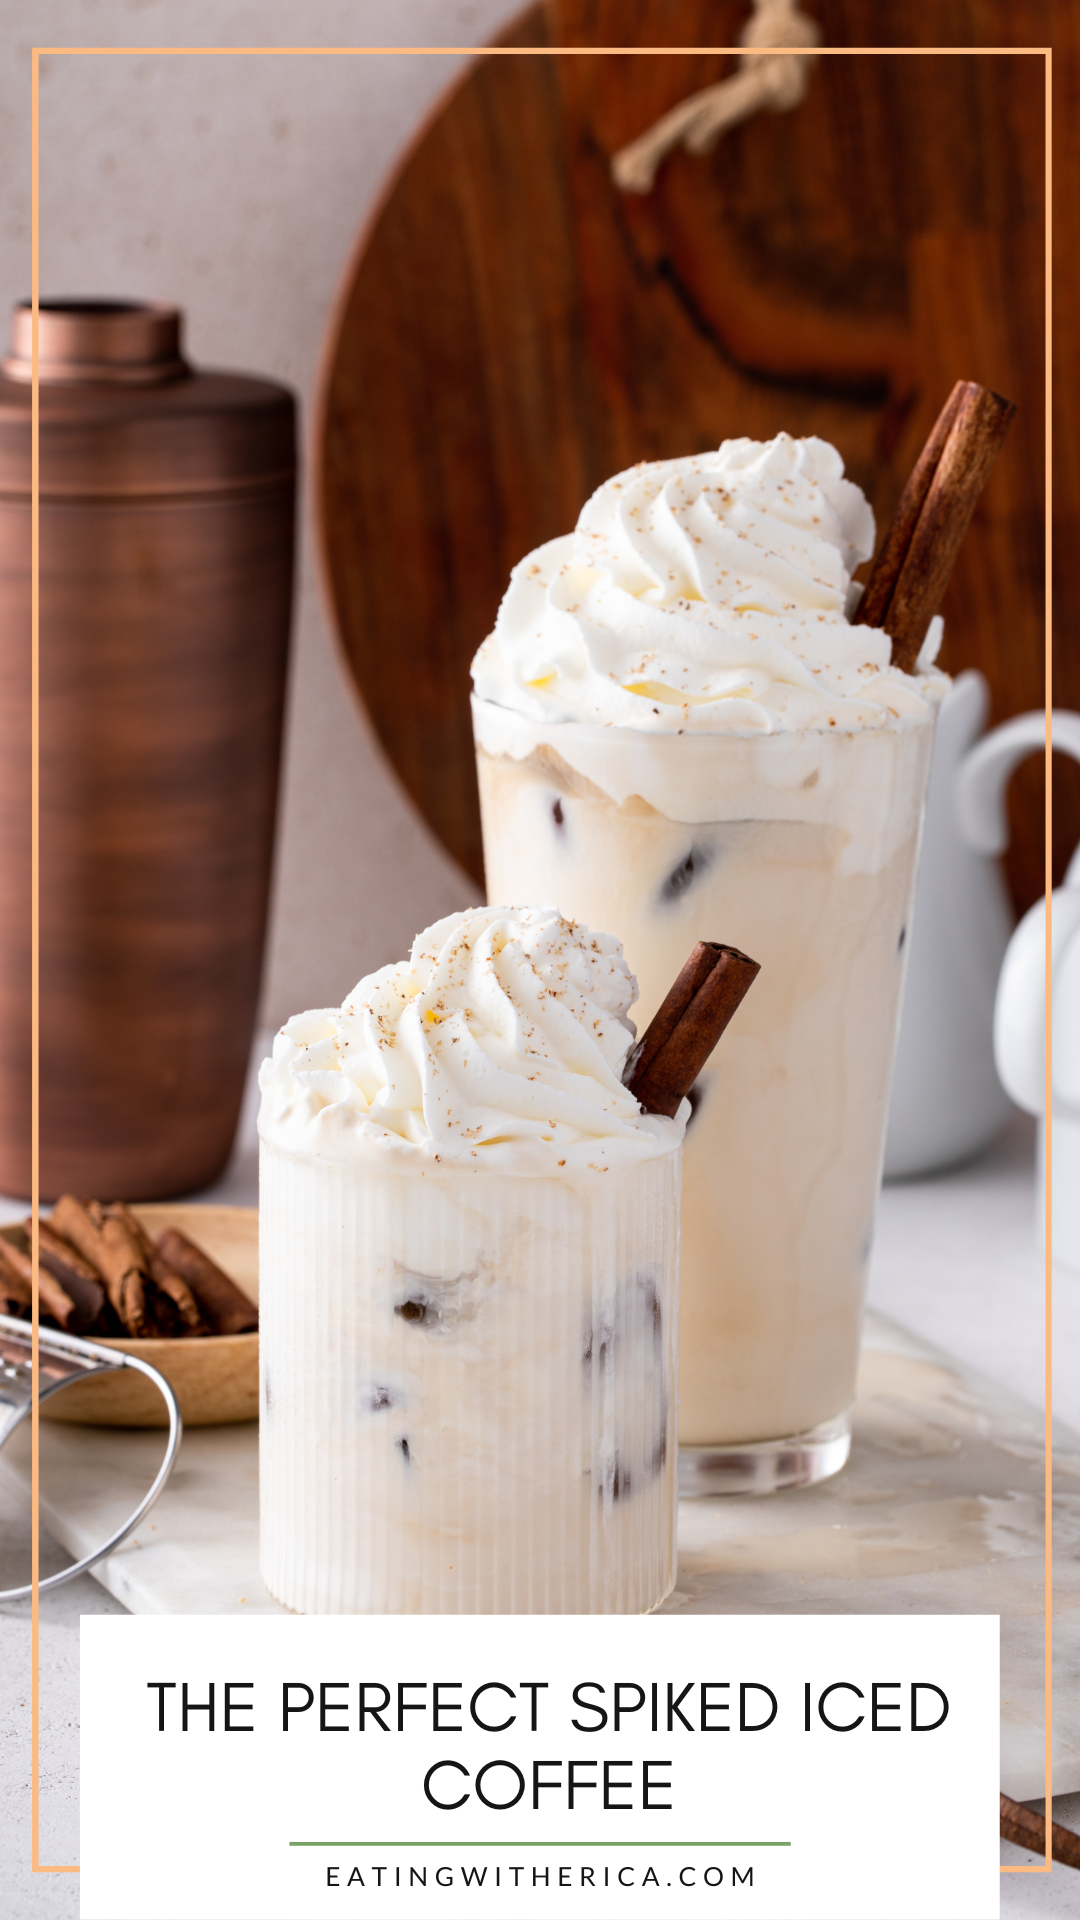 Who doesn't love a great Iced Coffee drink? Even better when it is a bit spiked, am I right? Click HERE to make the best spiked Iced Coffee recipe ever!